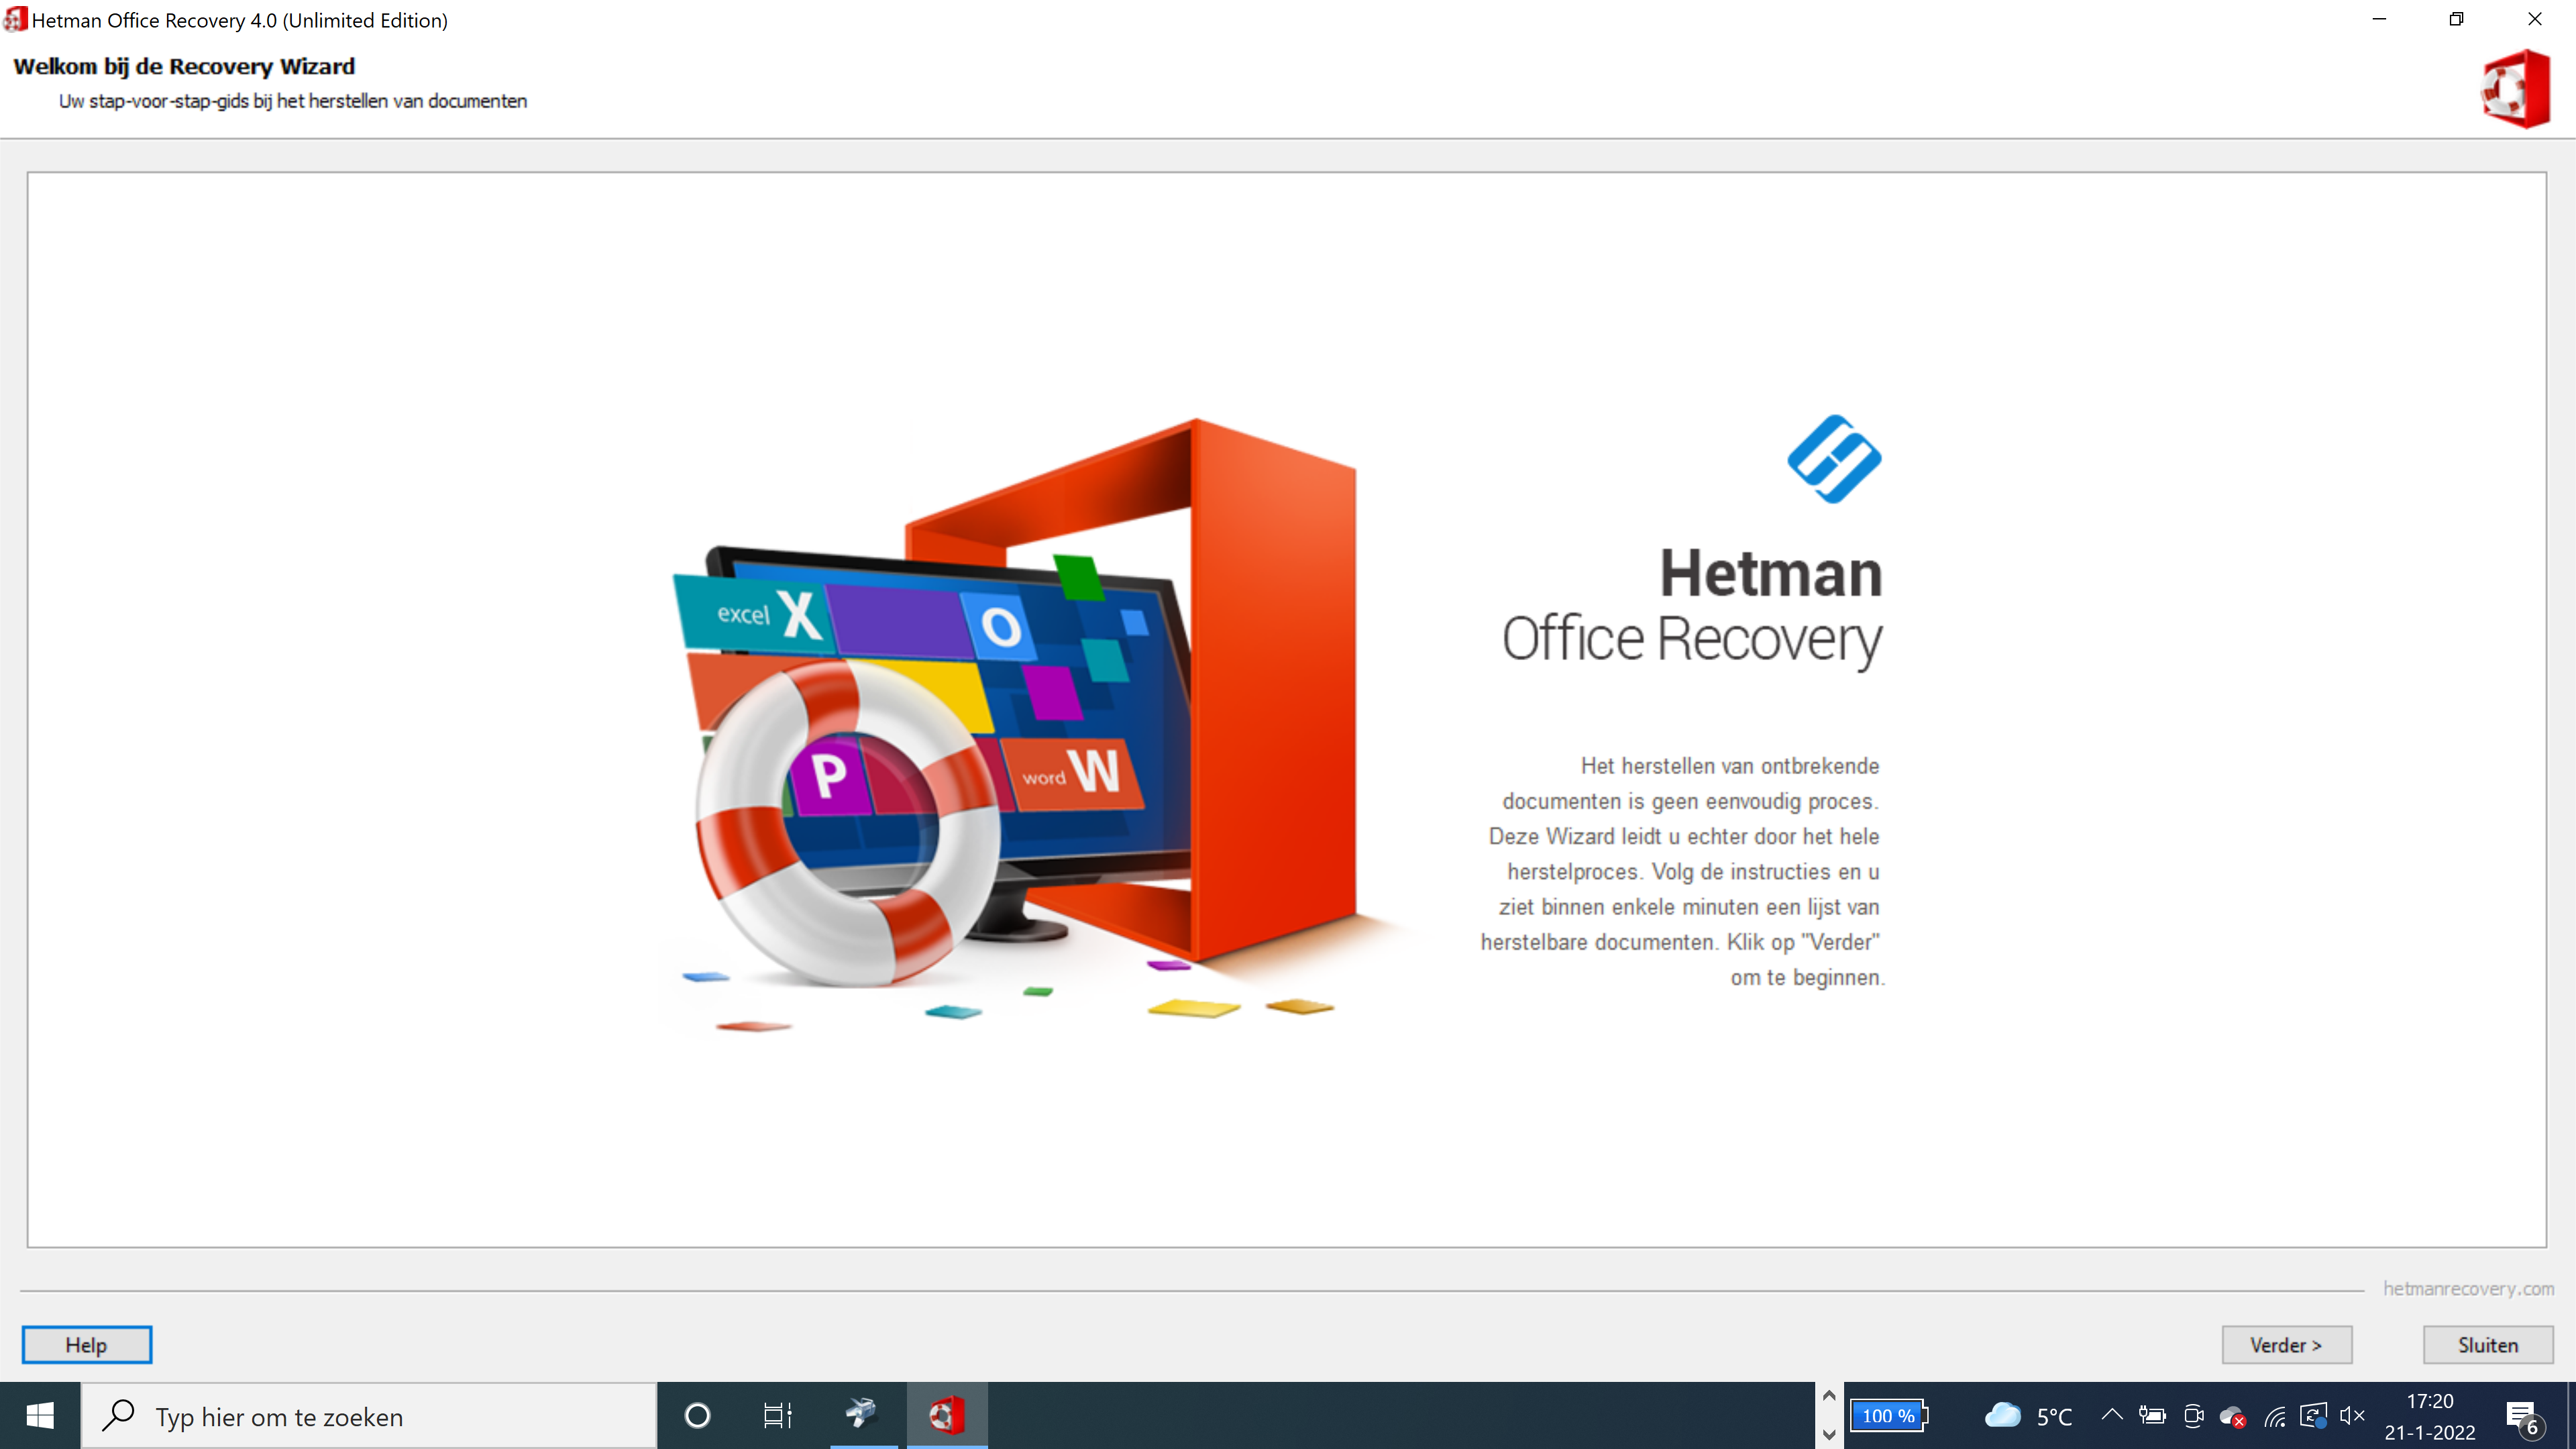 Hetman Office Recovery 4.0 Unlimited Edition (Nederlands)